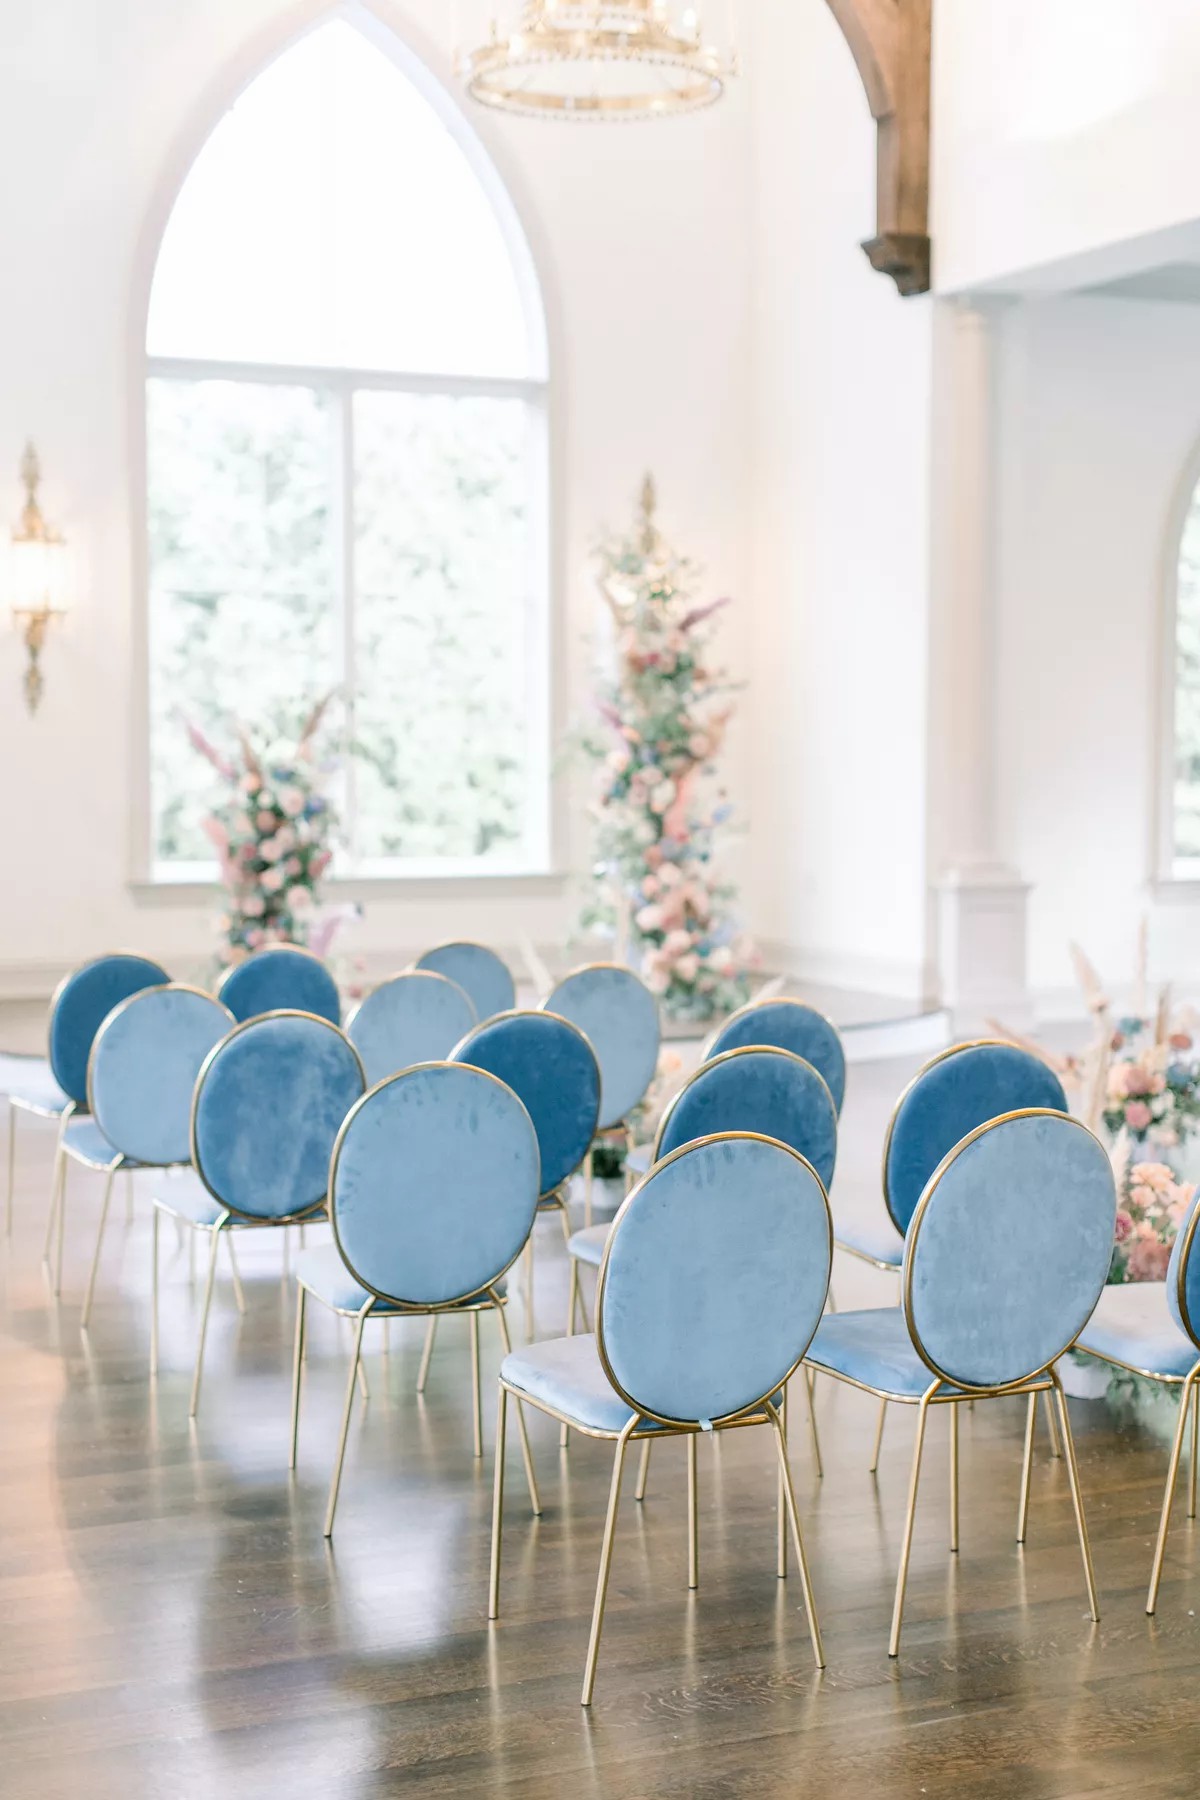 A Pastel Wedding Color Scheme And 19 Dreamiest Pastel Wedding Decoration Ideas To Inspire You - Pastels Can Work For Any Season